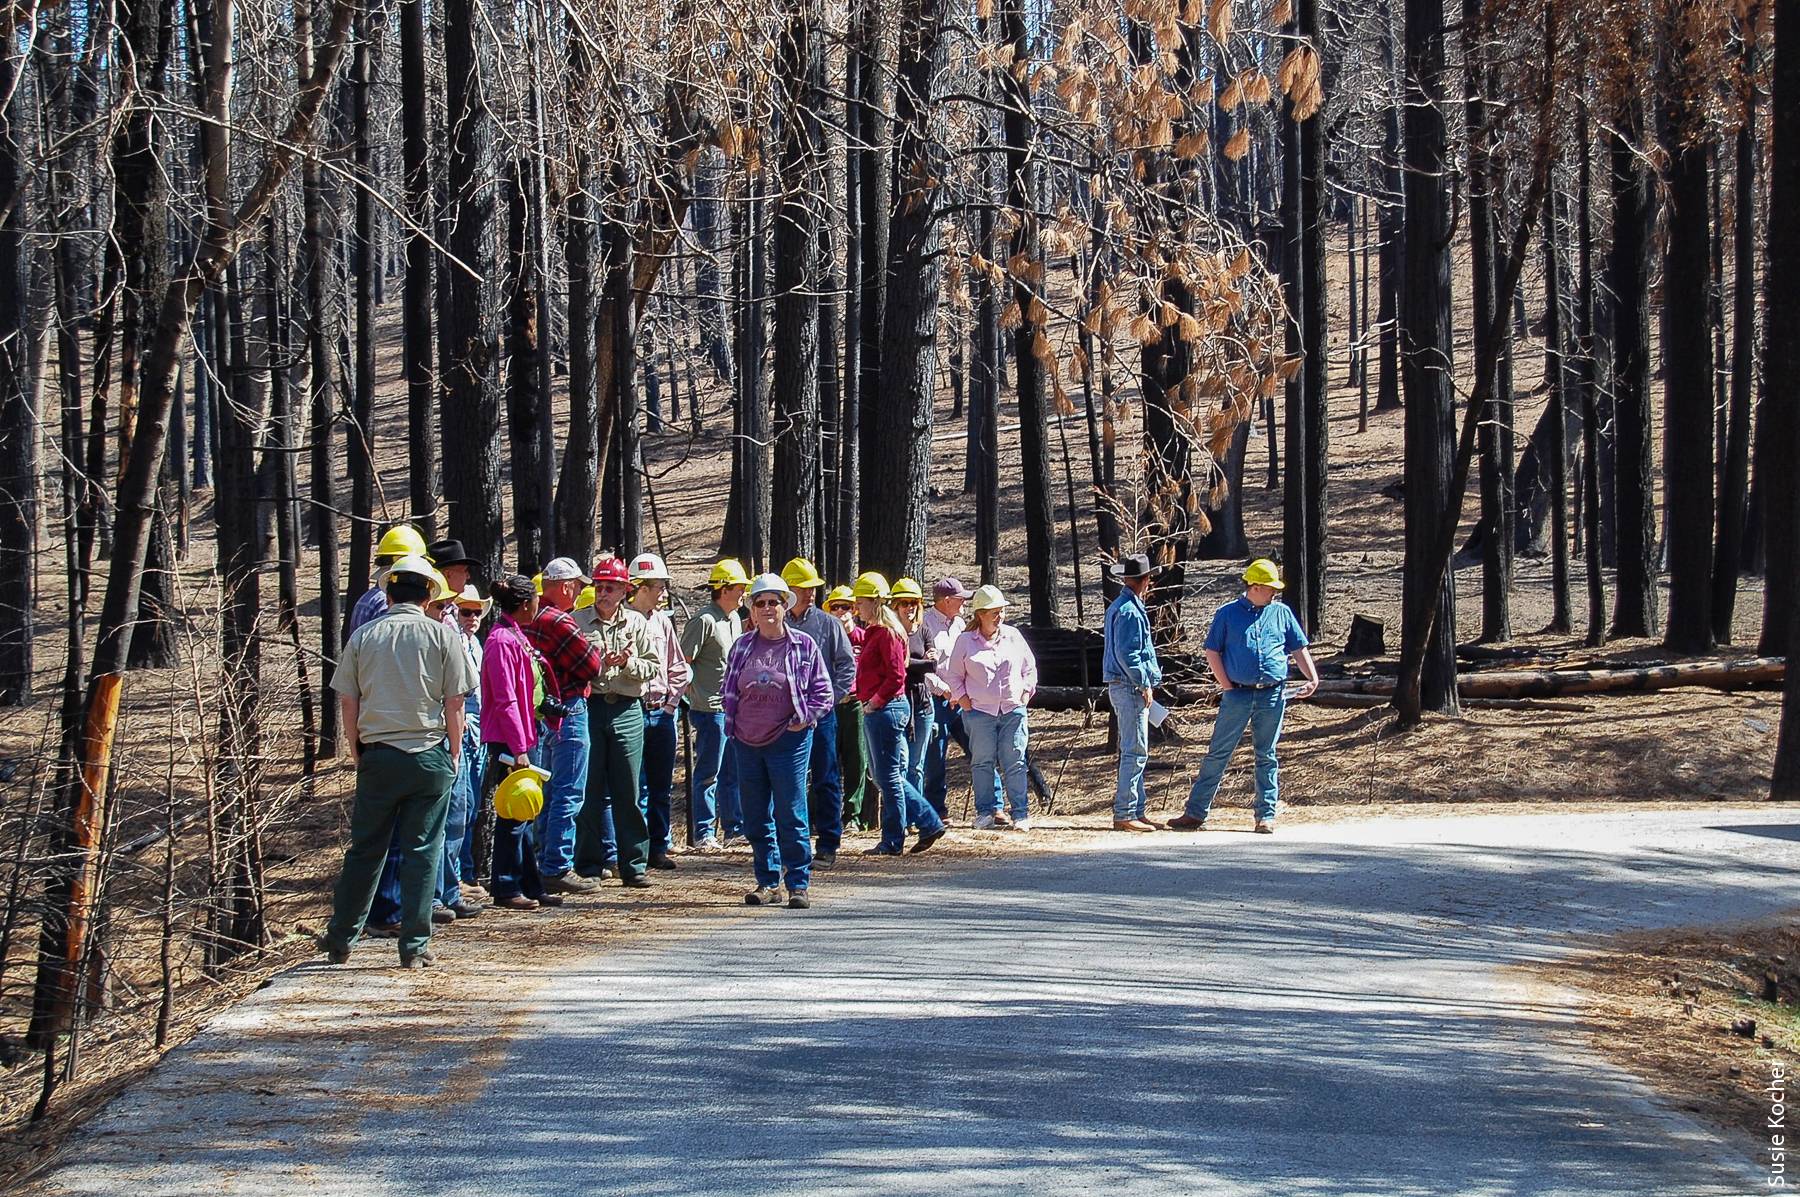 Tour of Rim fire area in the Stanislaus National Forest, March 2014. Participants are looking at high severity fire effects where all trees were killed.